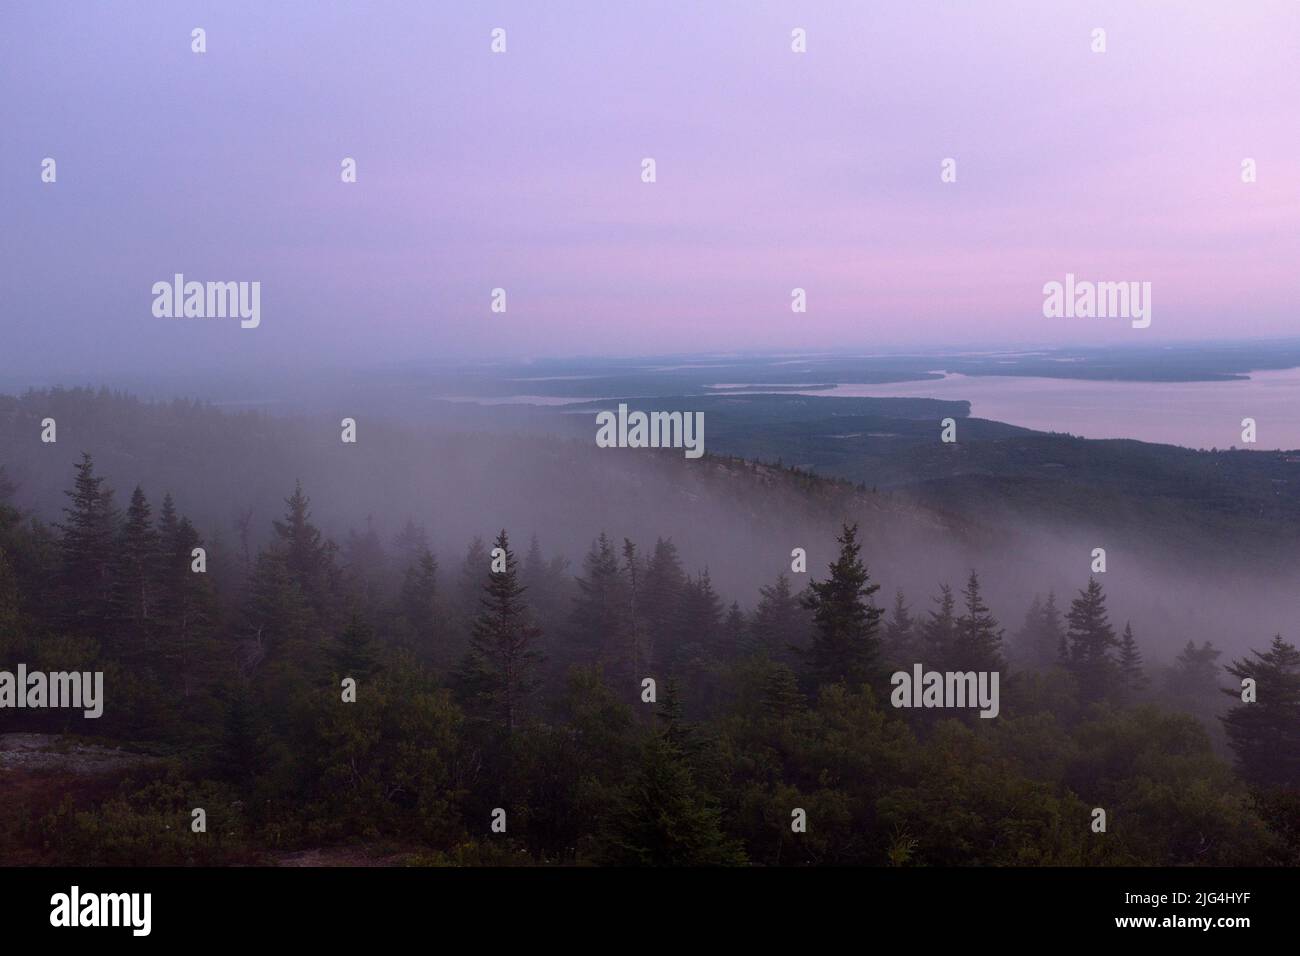 Foggy Landscape at Sunrise with Bar Harbor, Maine, USA in Distance Stock Photo